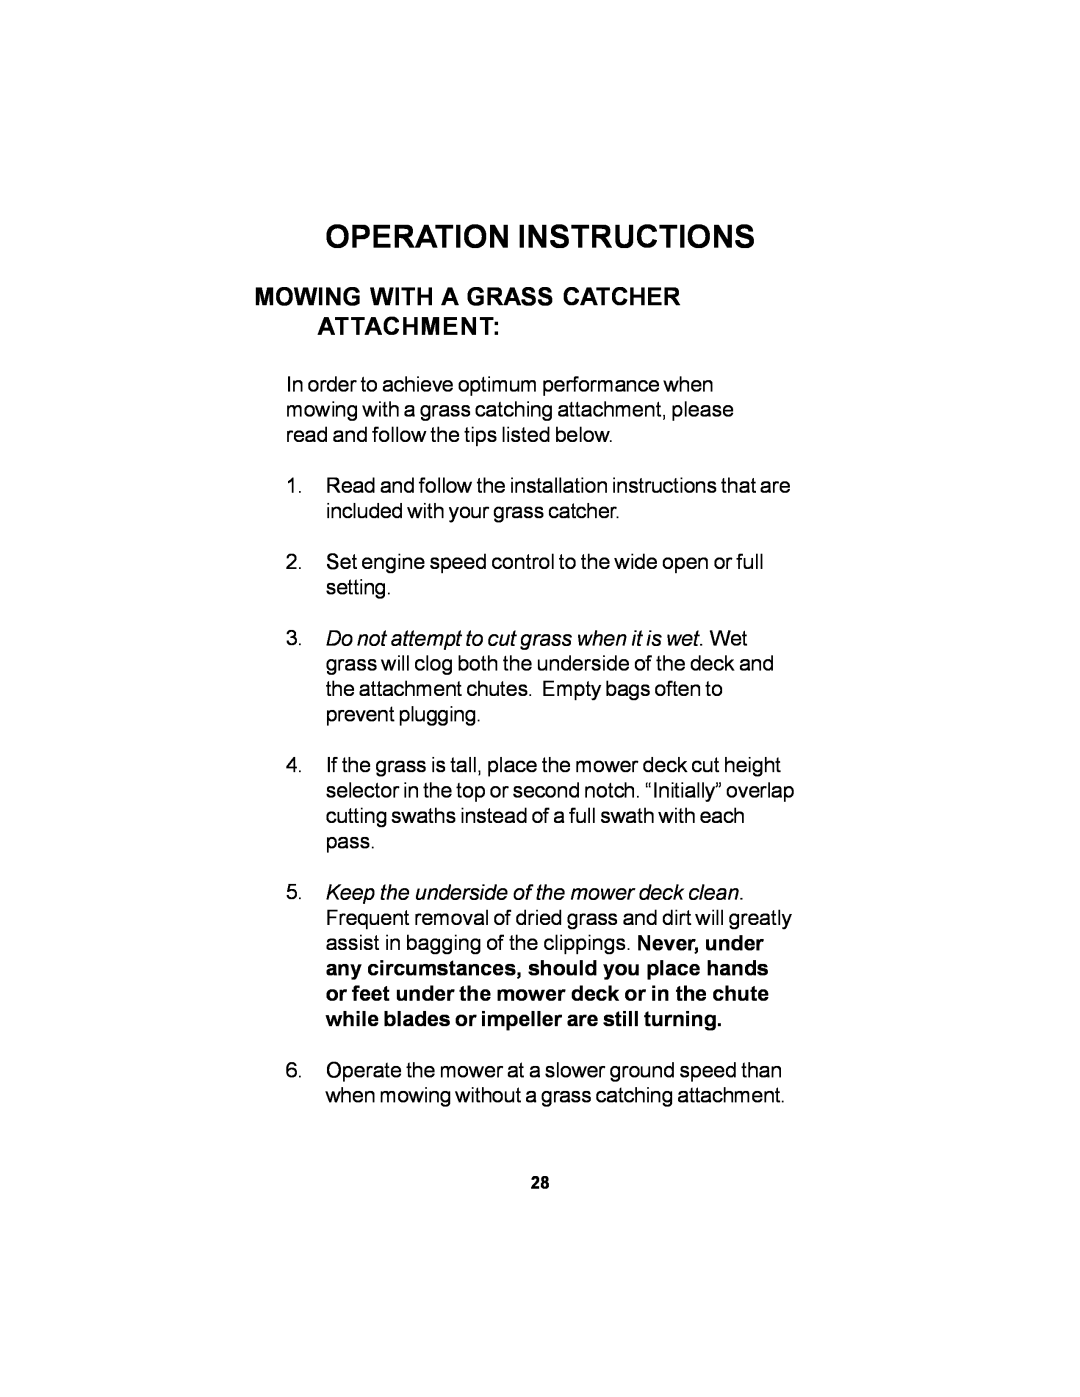 Dixon 14295-1005 manual Mowing With A Grass Catcher Attachment, Operation Instructions 